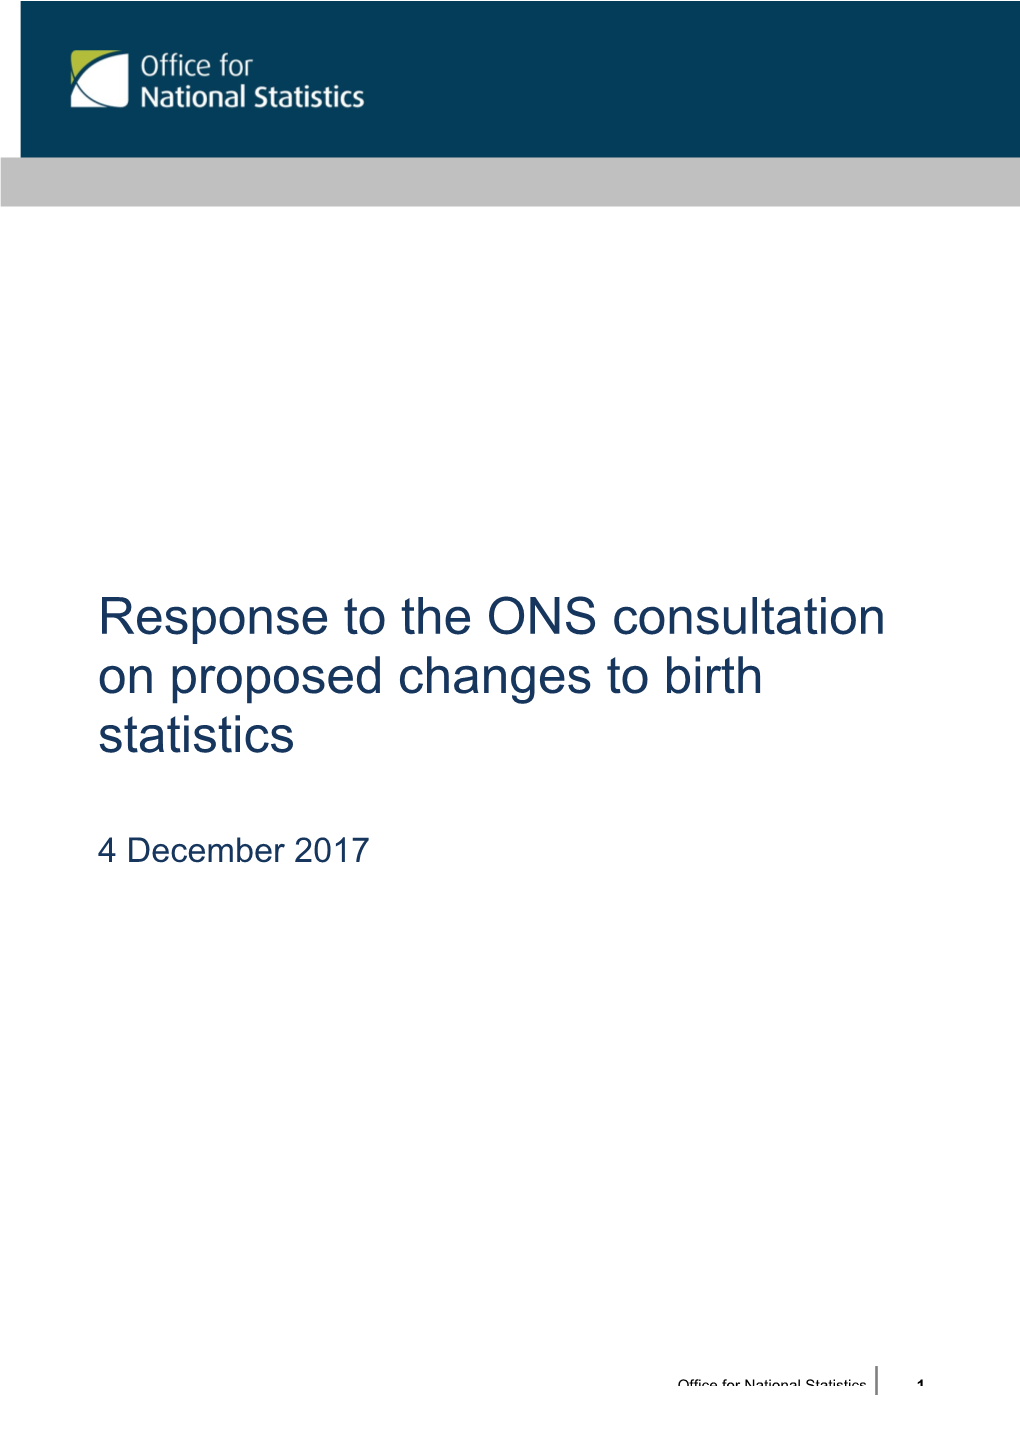 Response to the ONS Consultation on Proposed Changes to ONS Birth Statistics